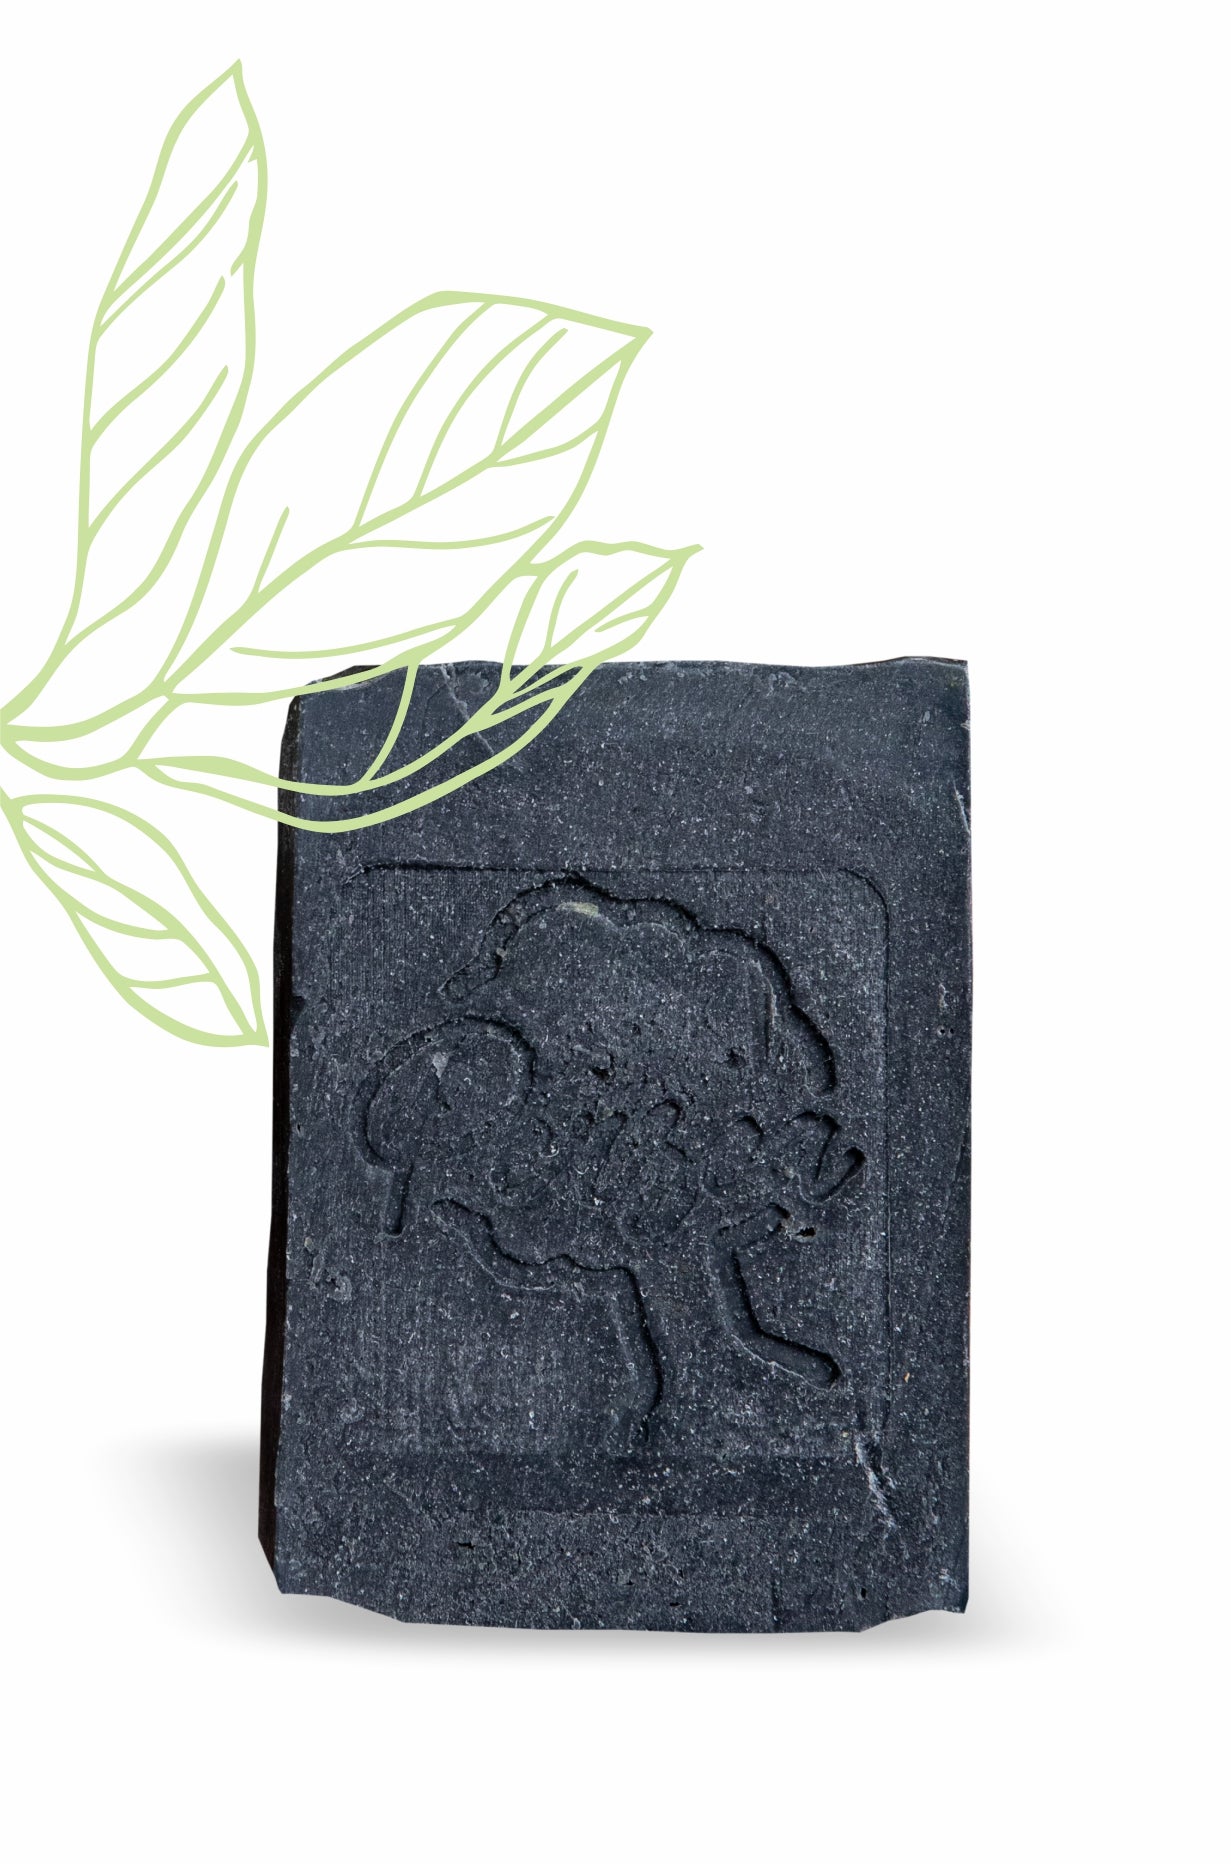 Persea Avo Top to Toe Bar soap. With Clay and Charcoal. All Natural.